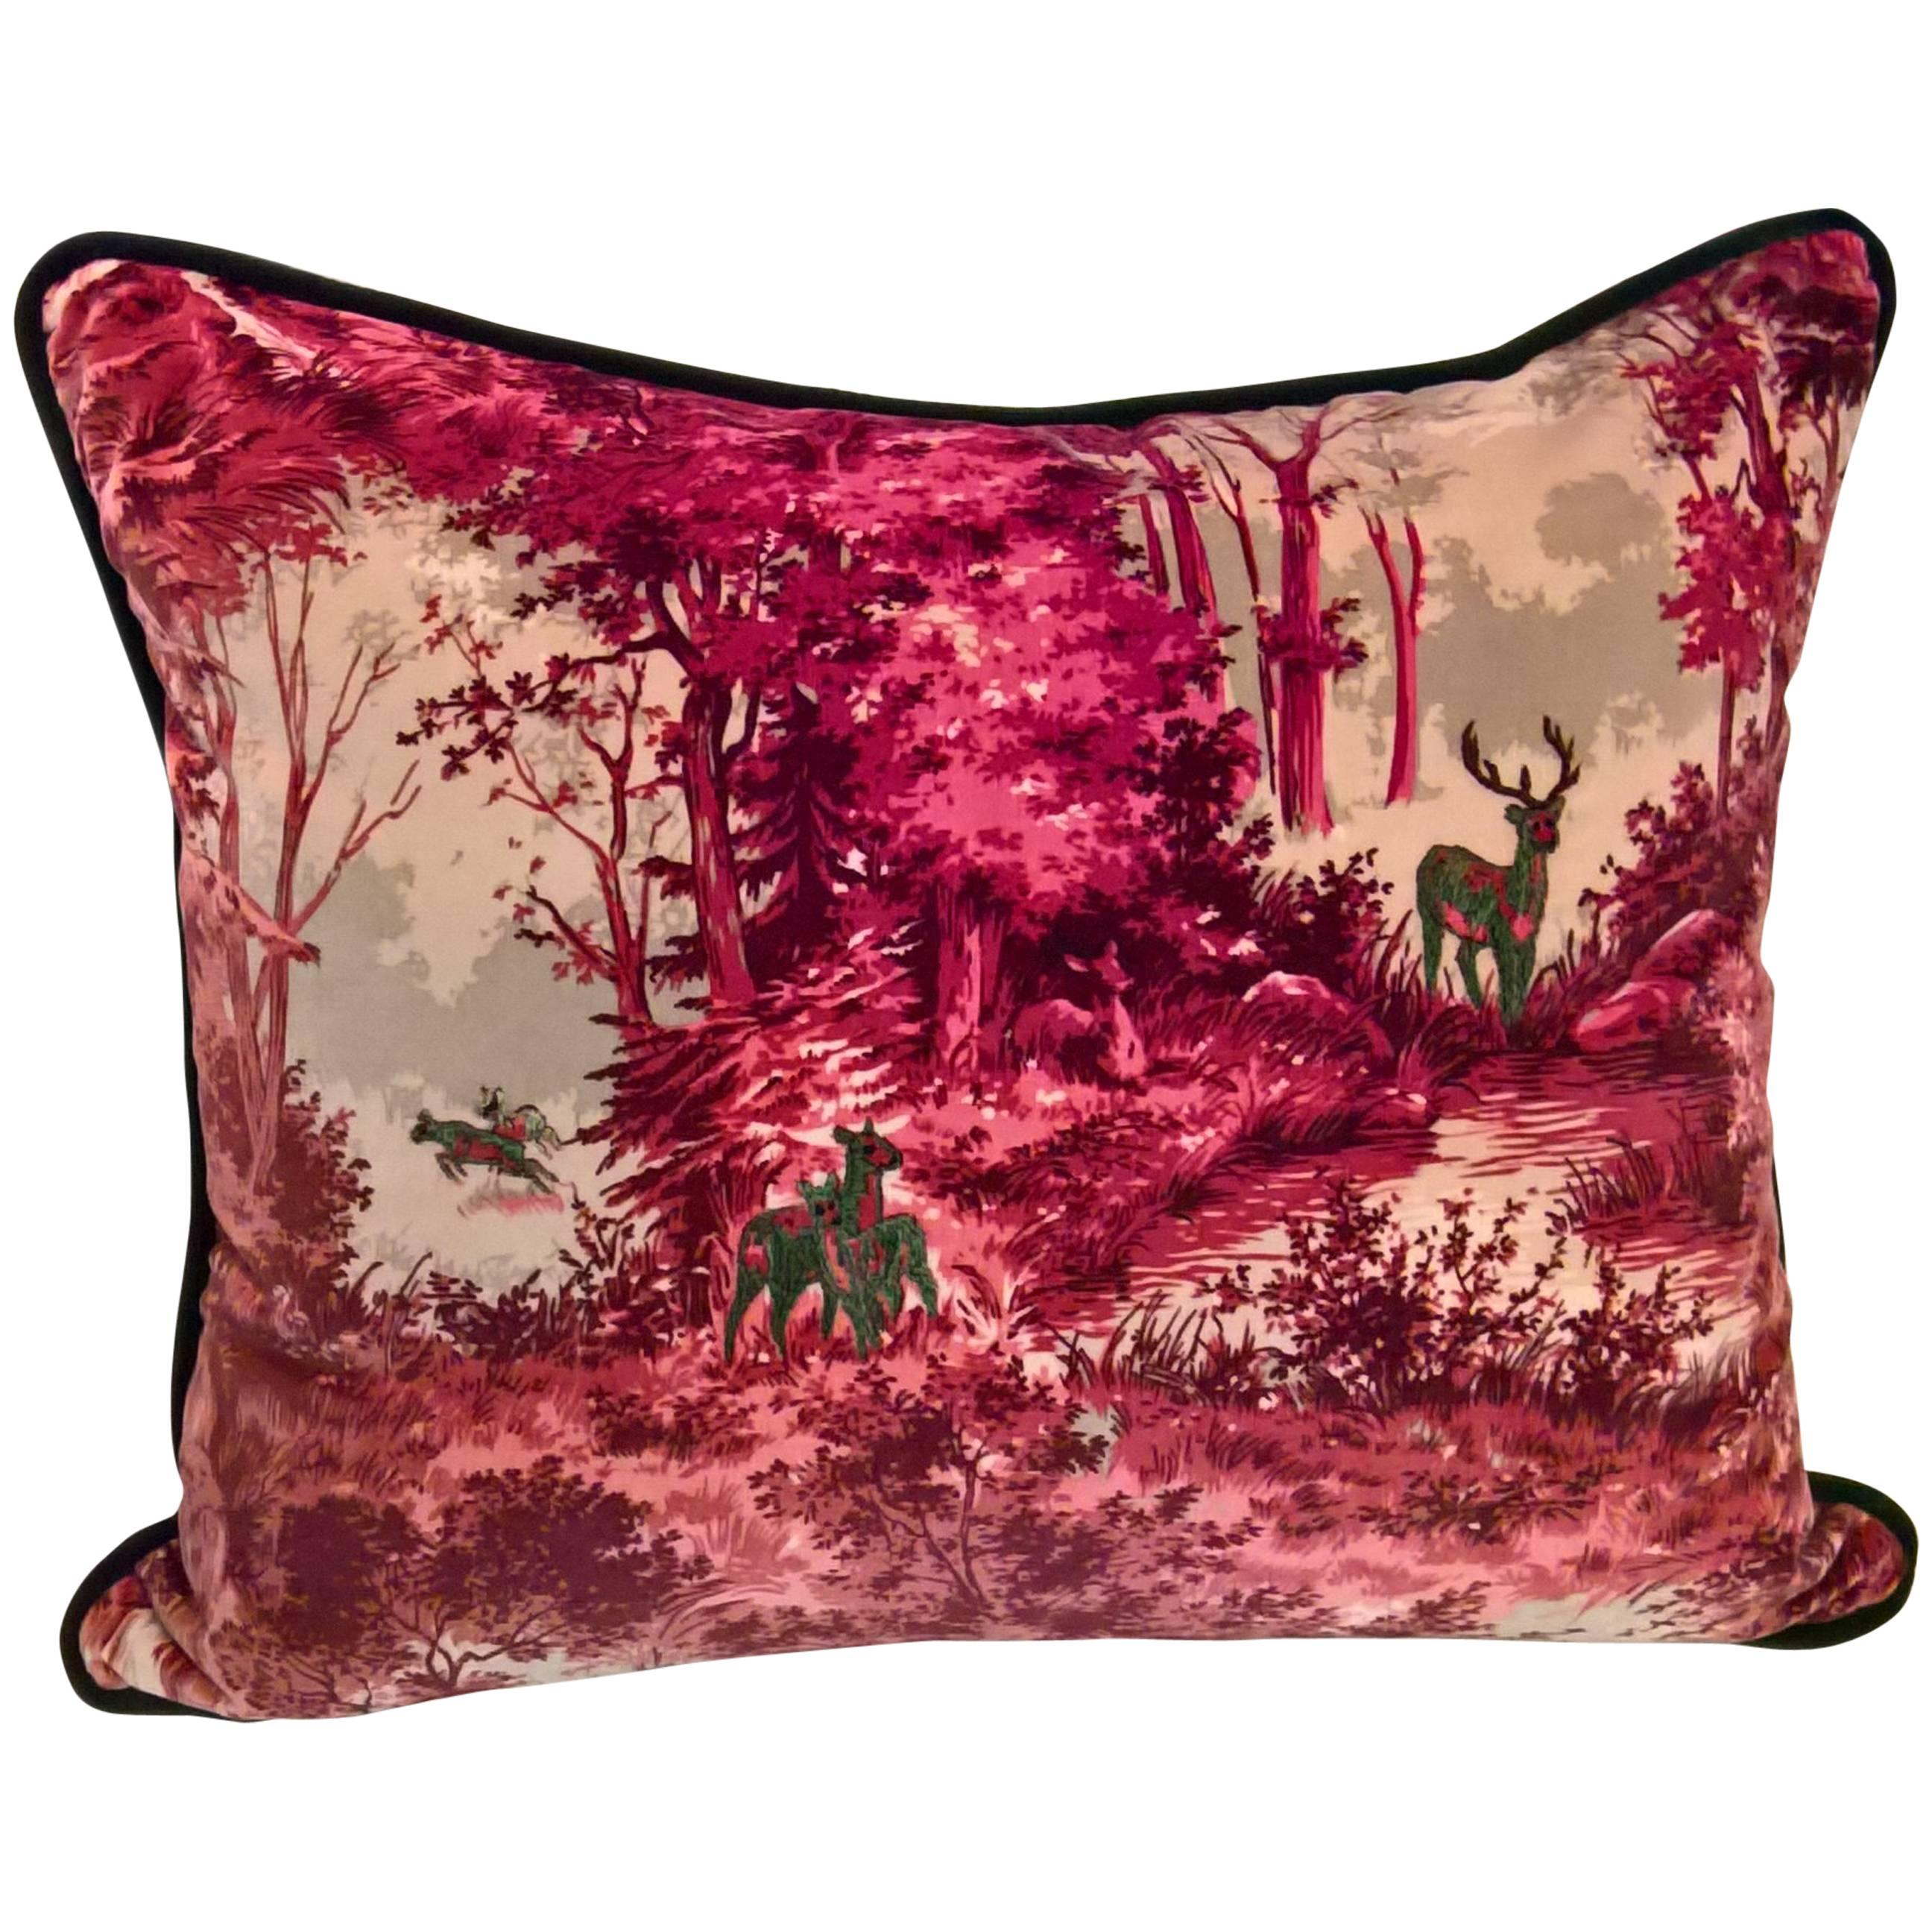 Black Forest Cushion in Red Velvet Hand Embroidered Sofina Boutique Kitzbuehel